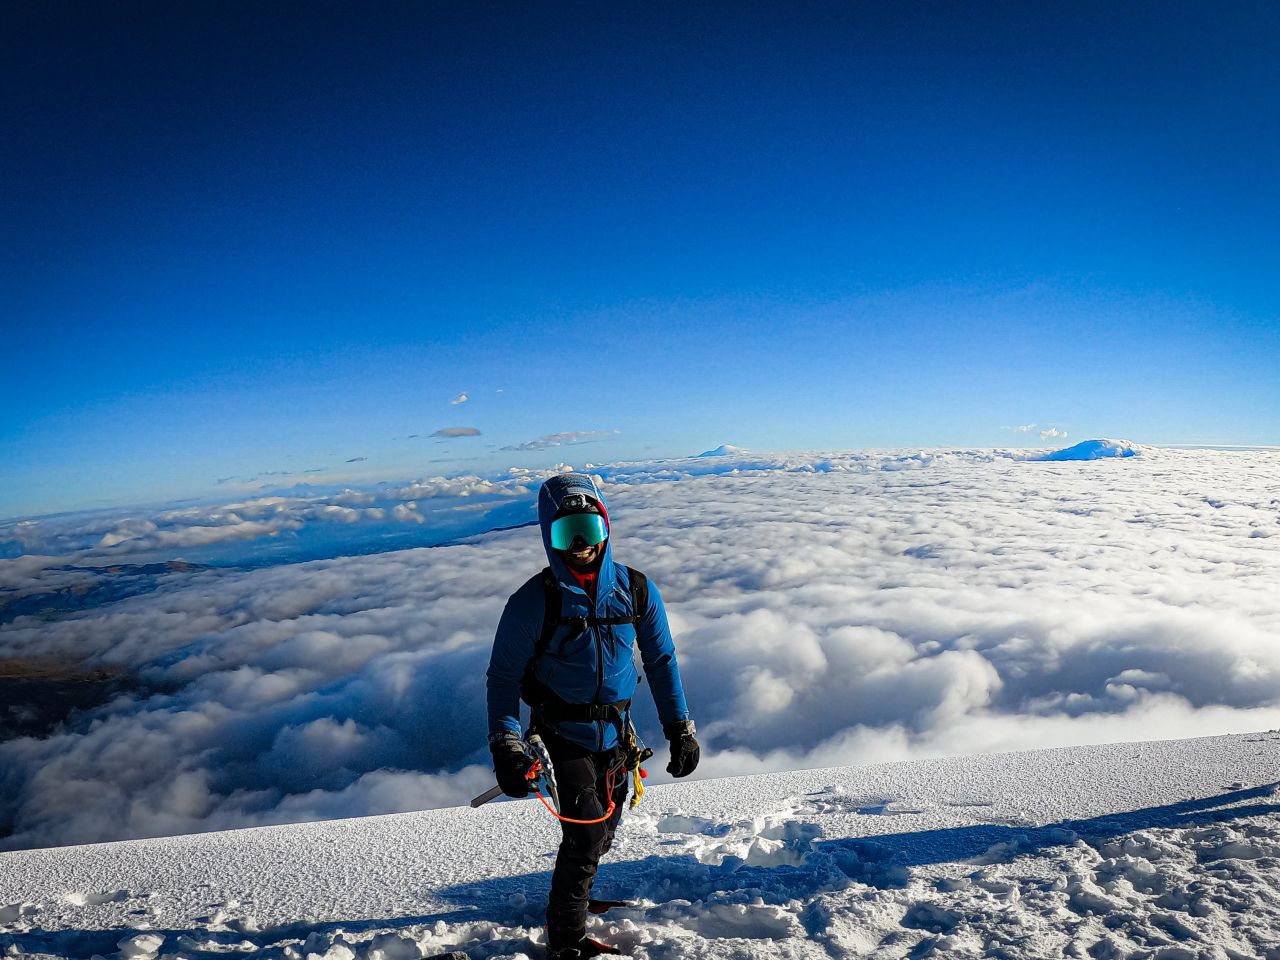 King says when he first picked up the sport in his 20s, he climbed in Walmart boots and a hoodie. He says that gear and expeditions are expensive and can be a barrier for entry into mountaineering. King relies on sponsorships to help outfit him. Here, he's pictured at the summit of Cotopaxi Volcano in Ecuador on November 7, 2021.